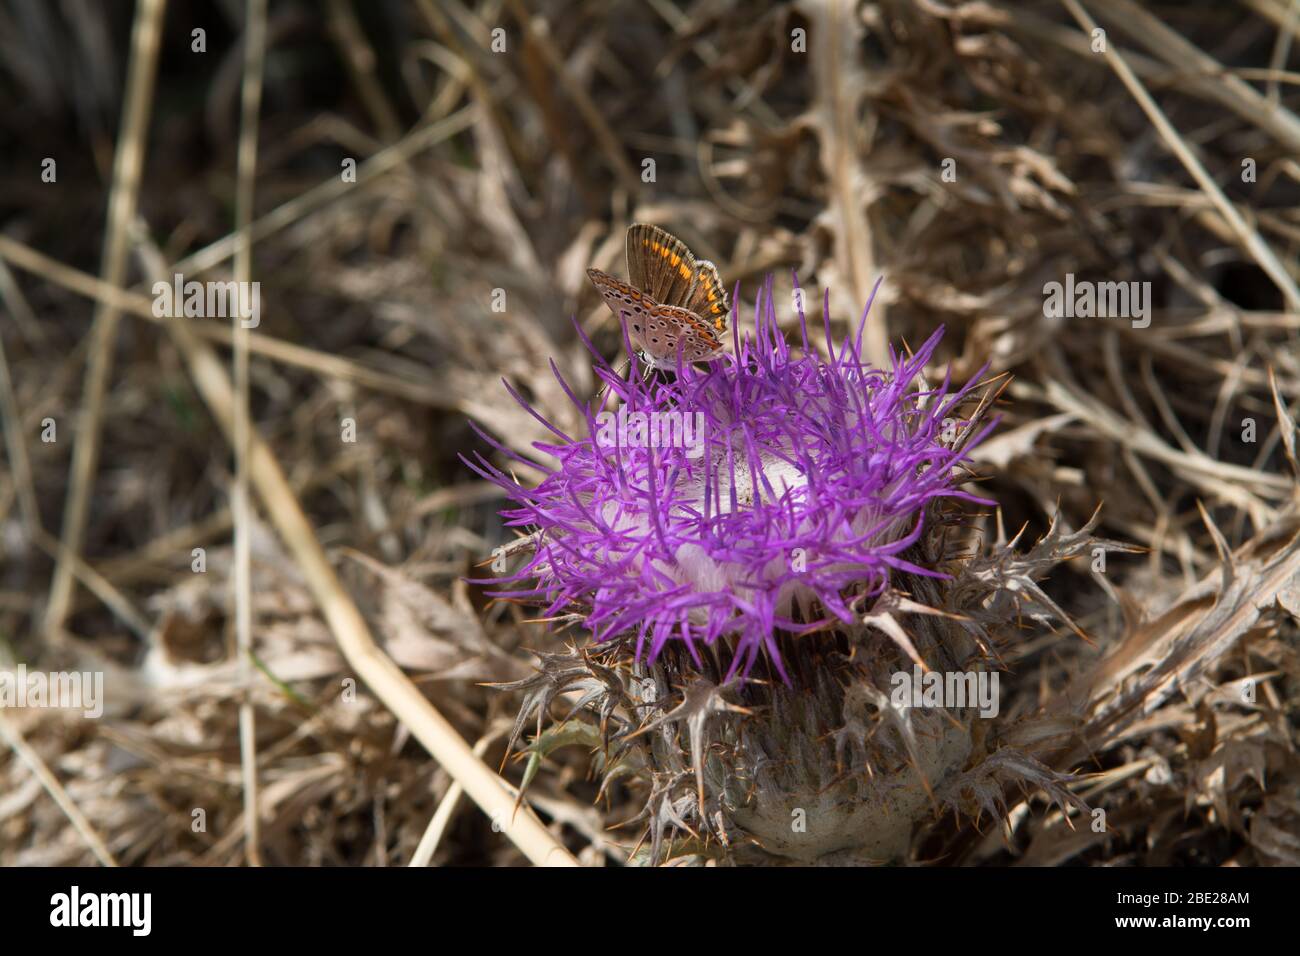 Brown Argus butterfly on purple thistle blossom surrounded by brown and dry blades of grass Stock Photo